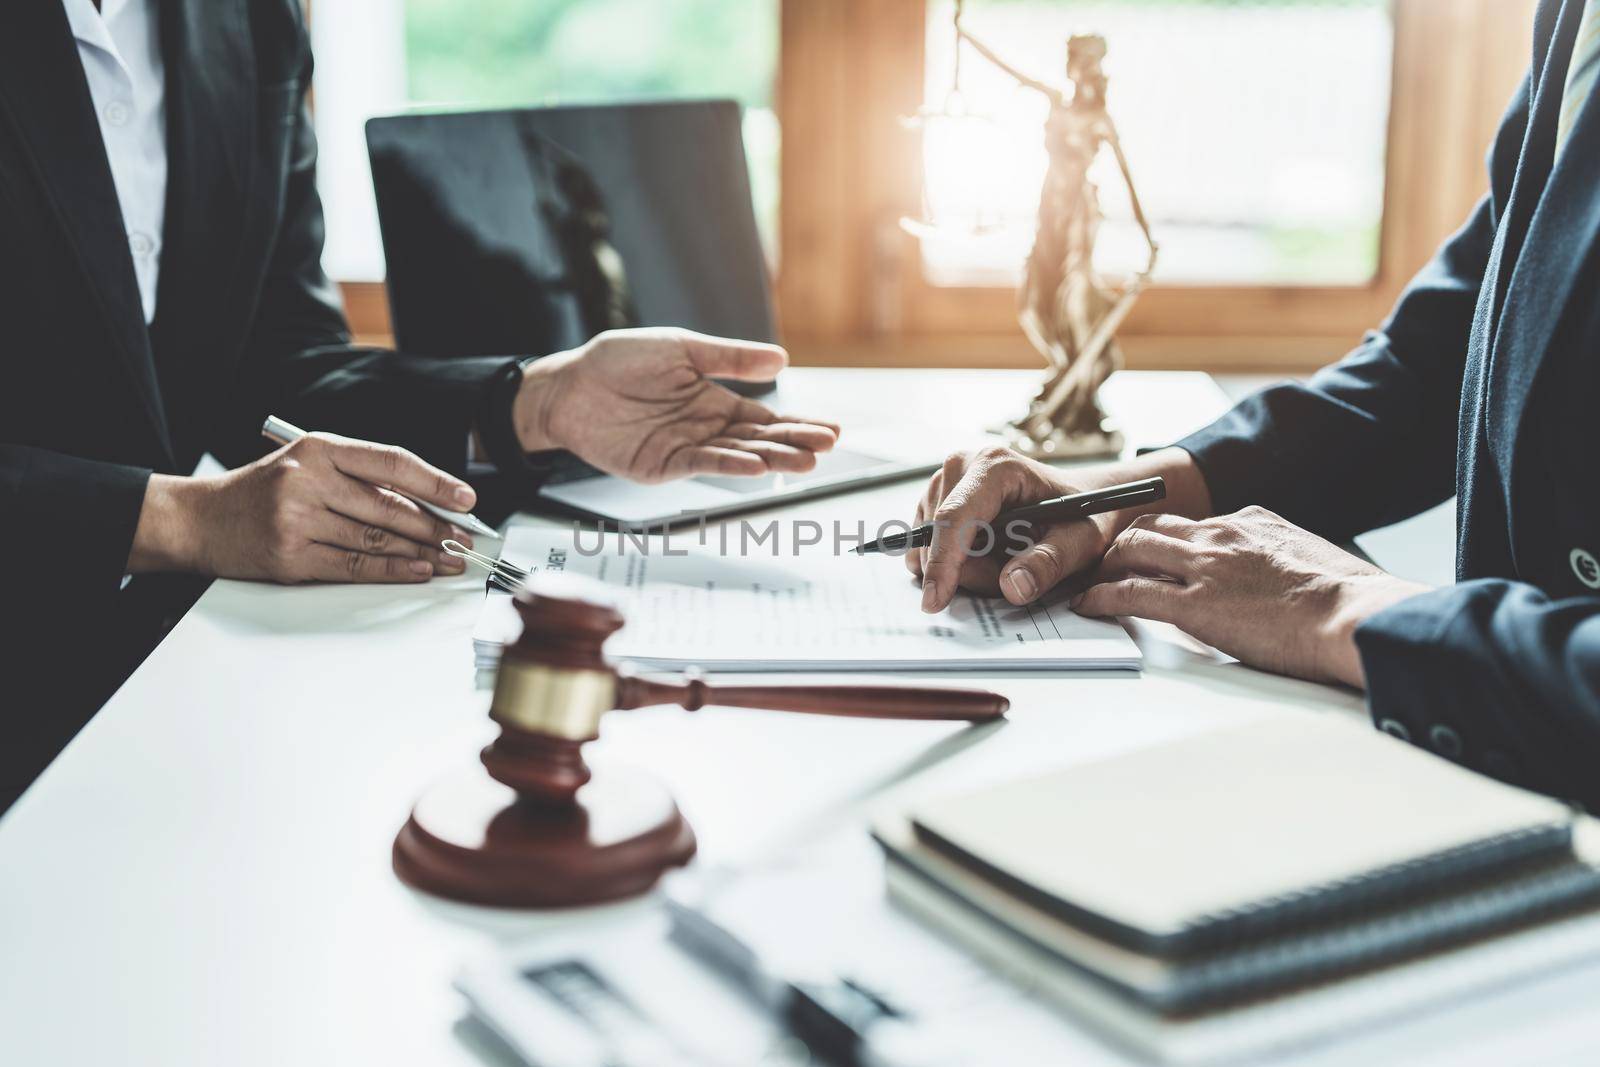 Law, Consultation, Agreement, Contract, Attorney or Lawyer holding a pen is consulting with a client to explain the pattern of answering questions before going to court to decide a lawsuit. by Manastrong